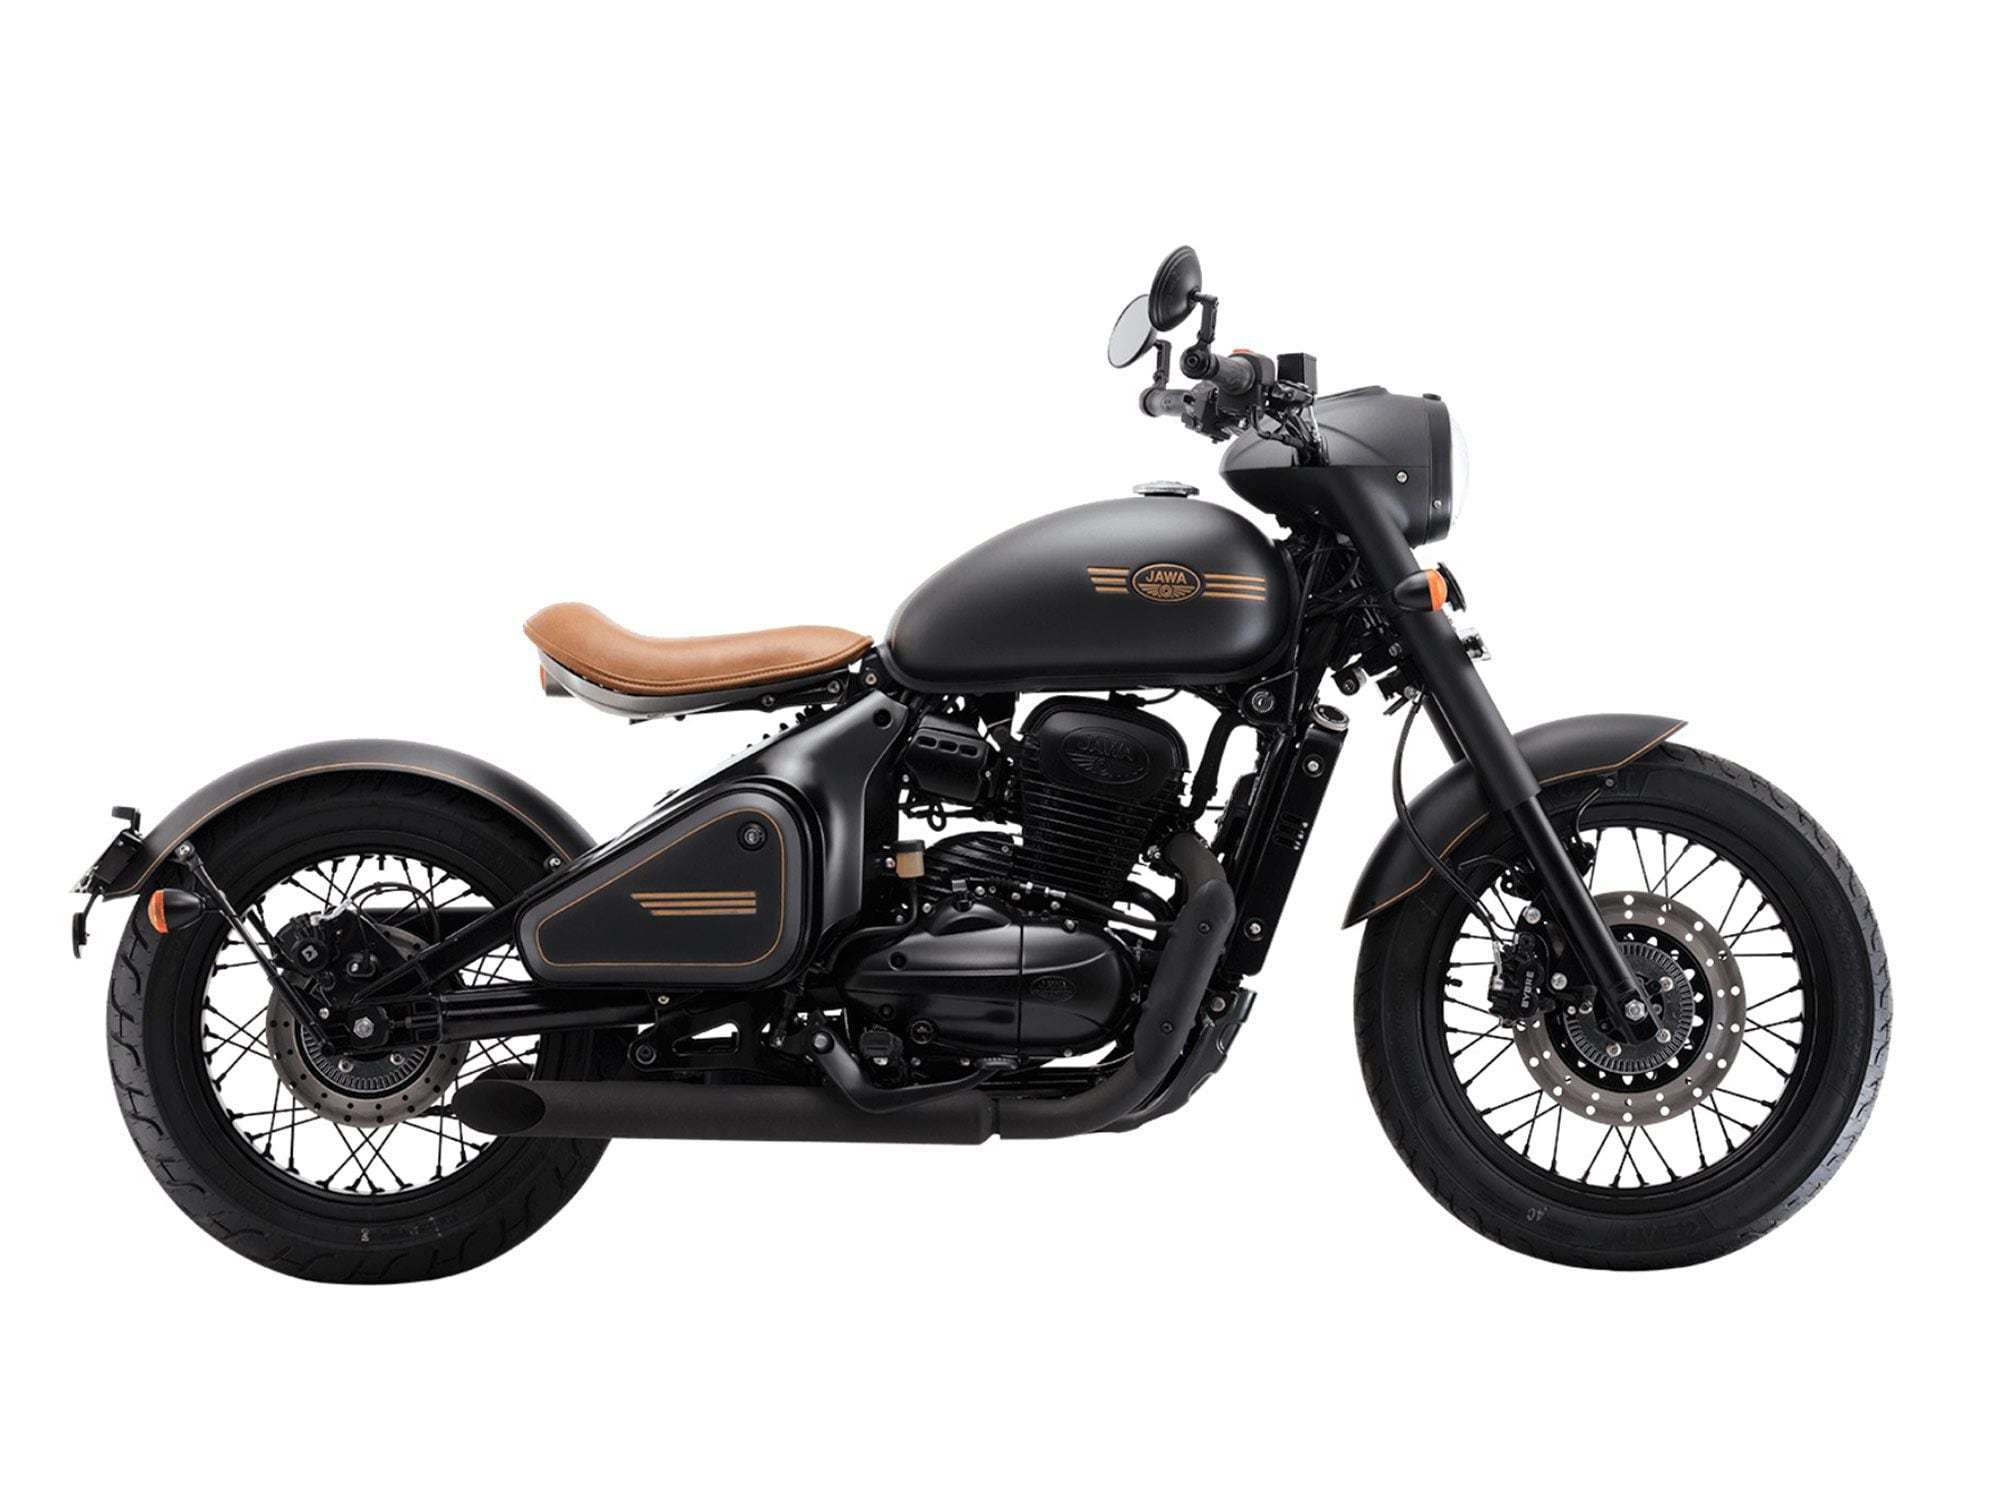 After initial production gaffes early on, Jawa came roaring out of the gate in 2020. Here’s the new Perak bobber.